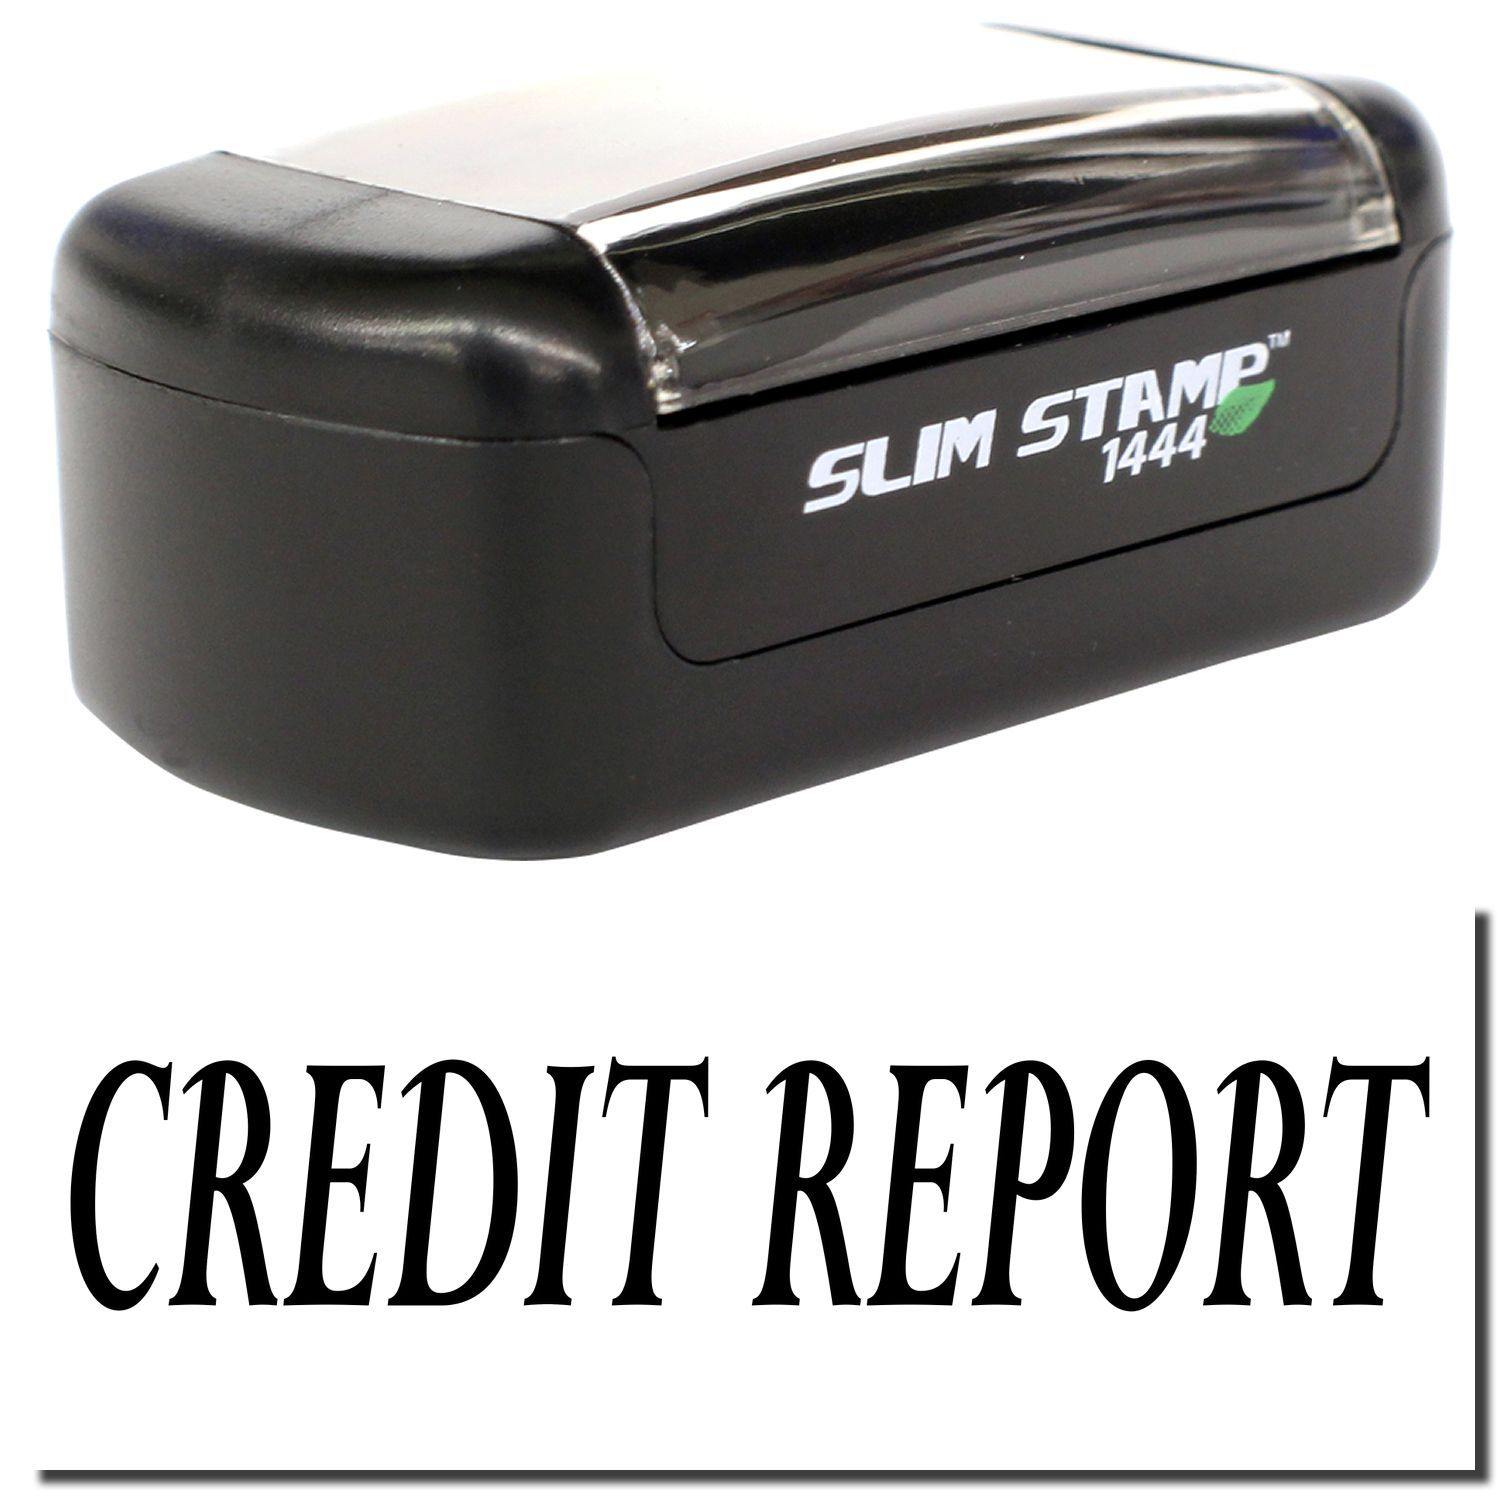 A stock office pre-inked stamp with a stamped image showing how the text "CREDIT REPORT" is displayed after stamping.